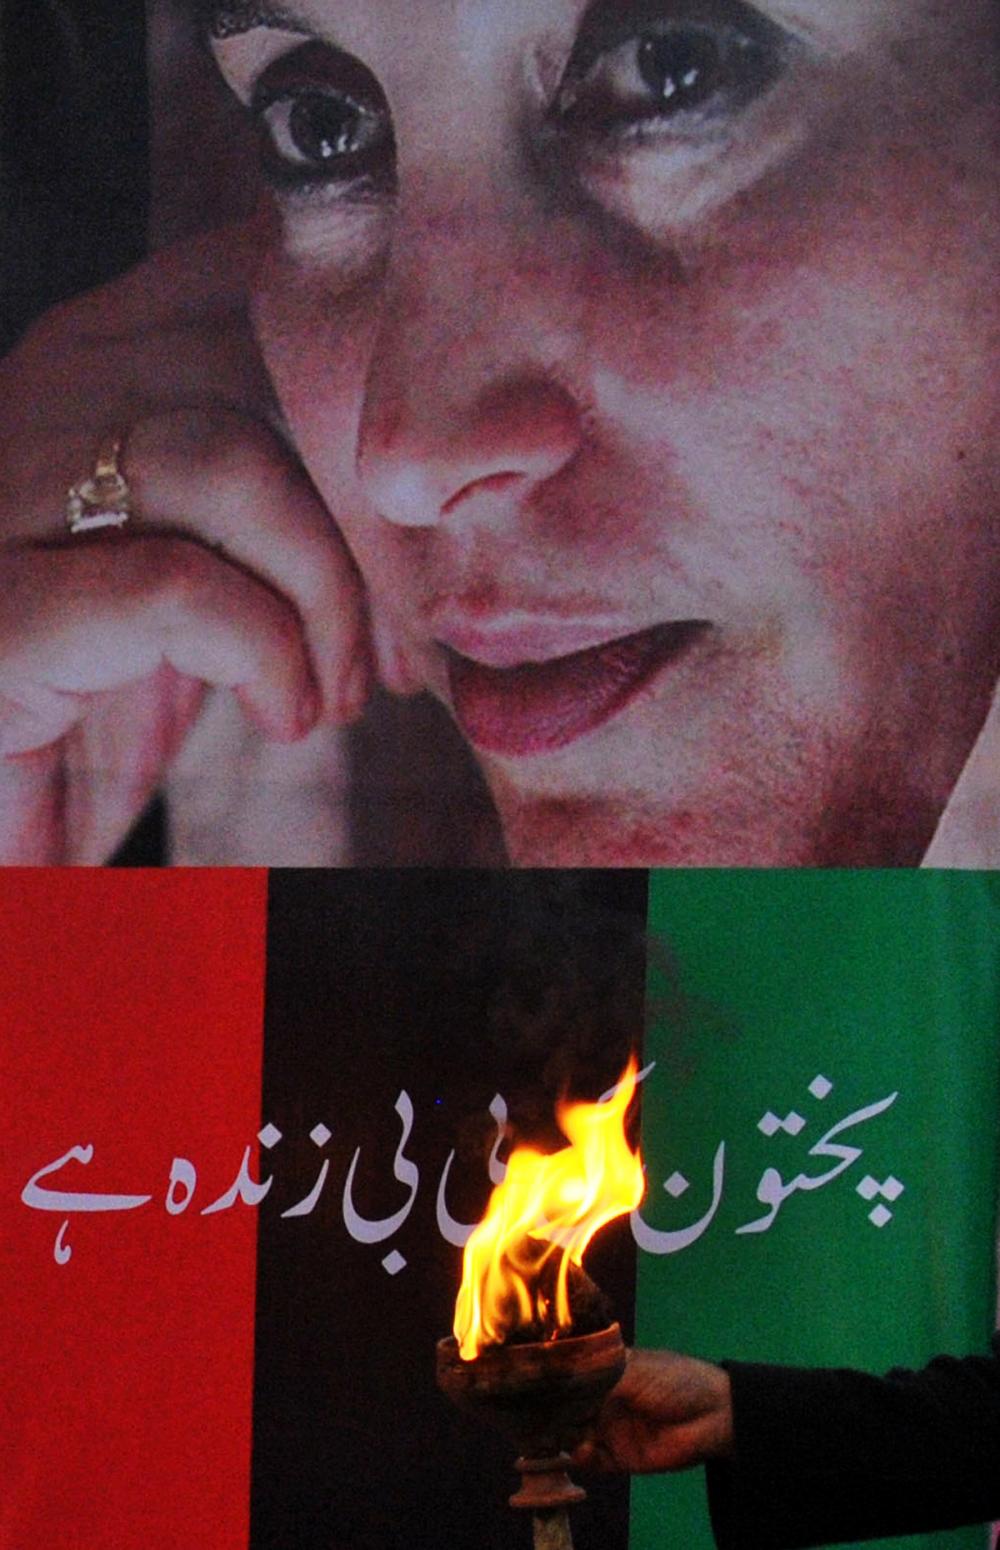 The Weekend Leader - After 14 years, Benazir Bhutto's assassination still remains a mystery